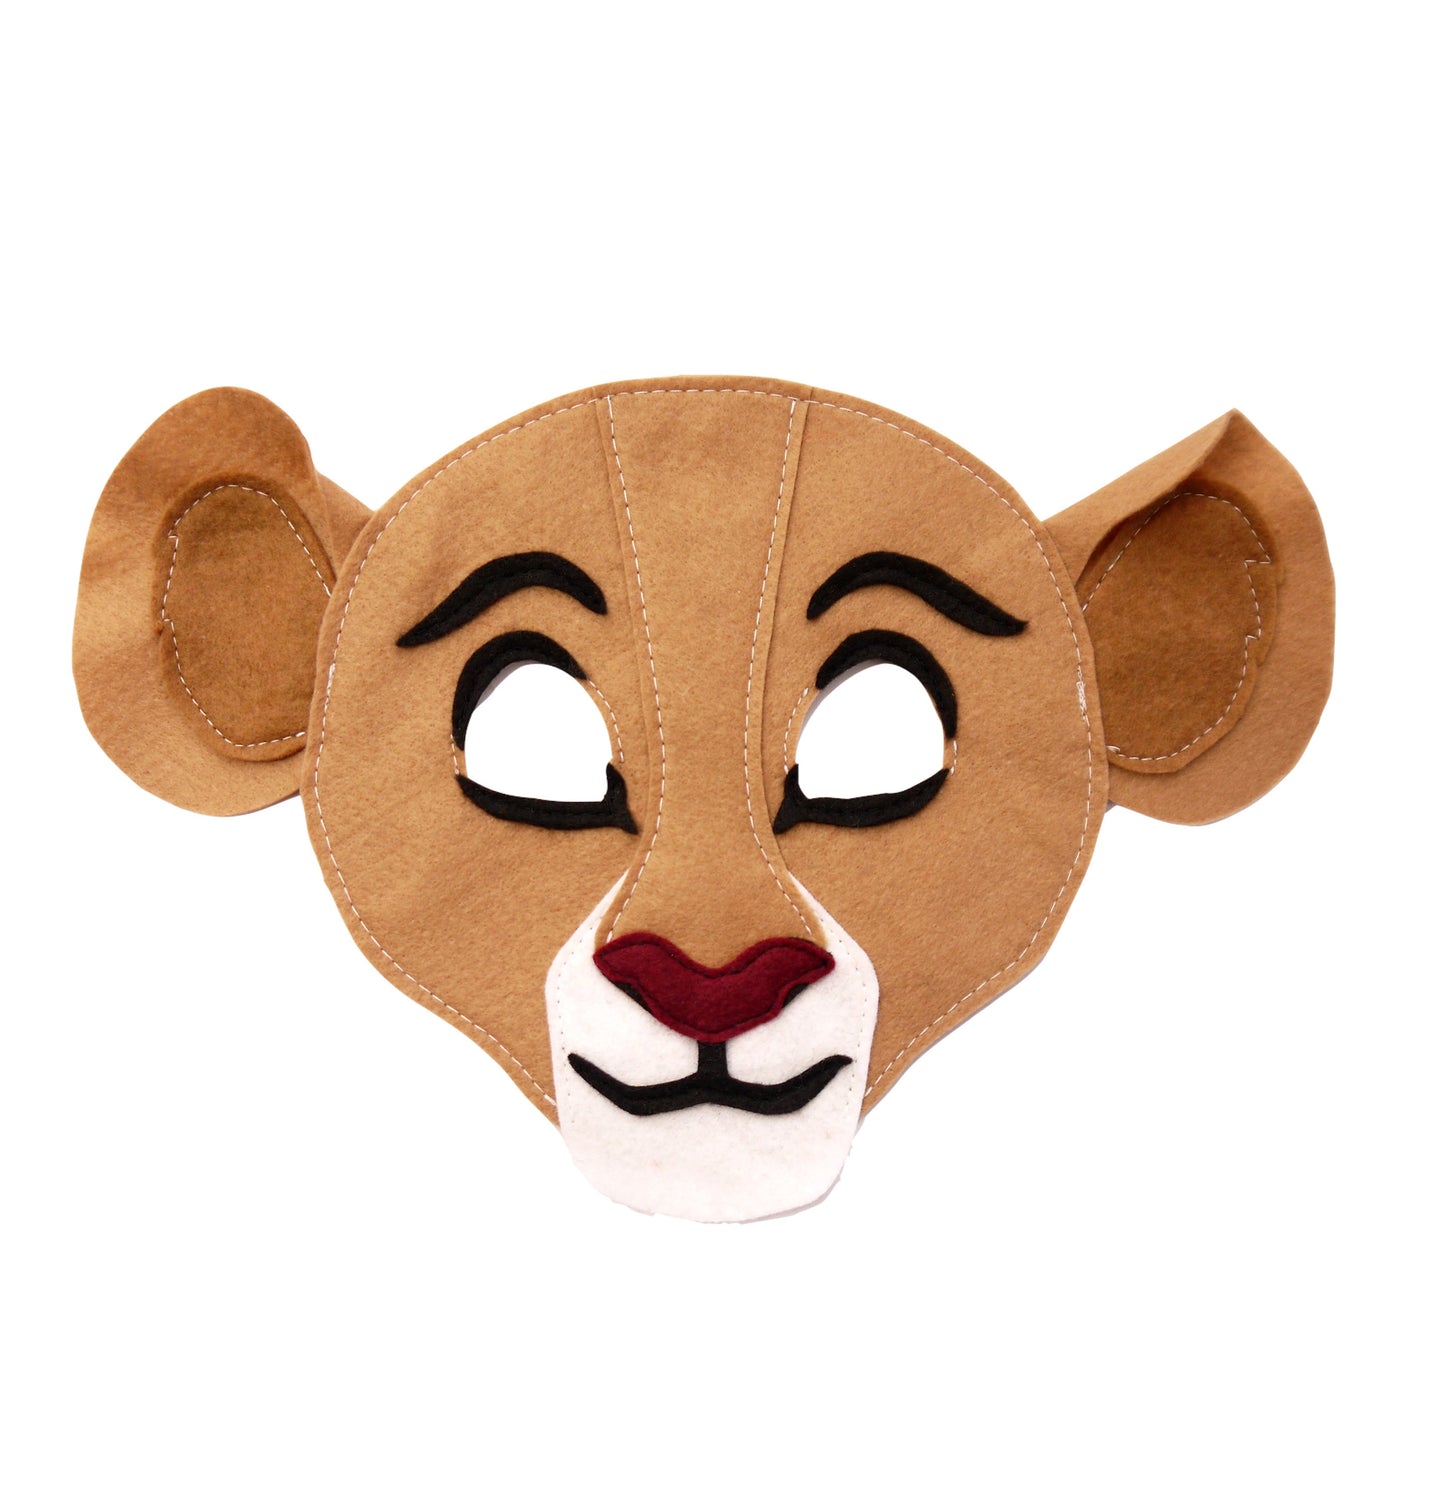 Lion cub costume mask kids and adult size